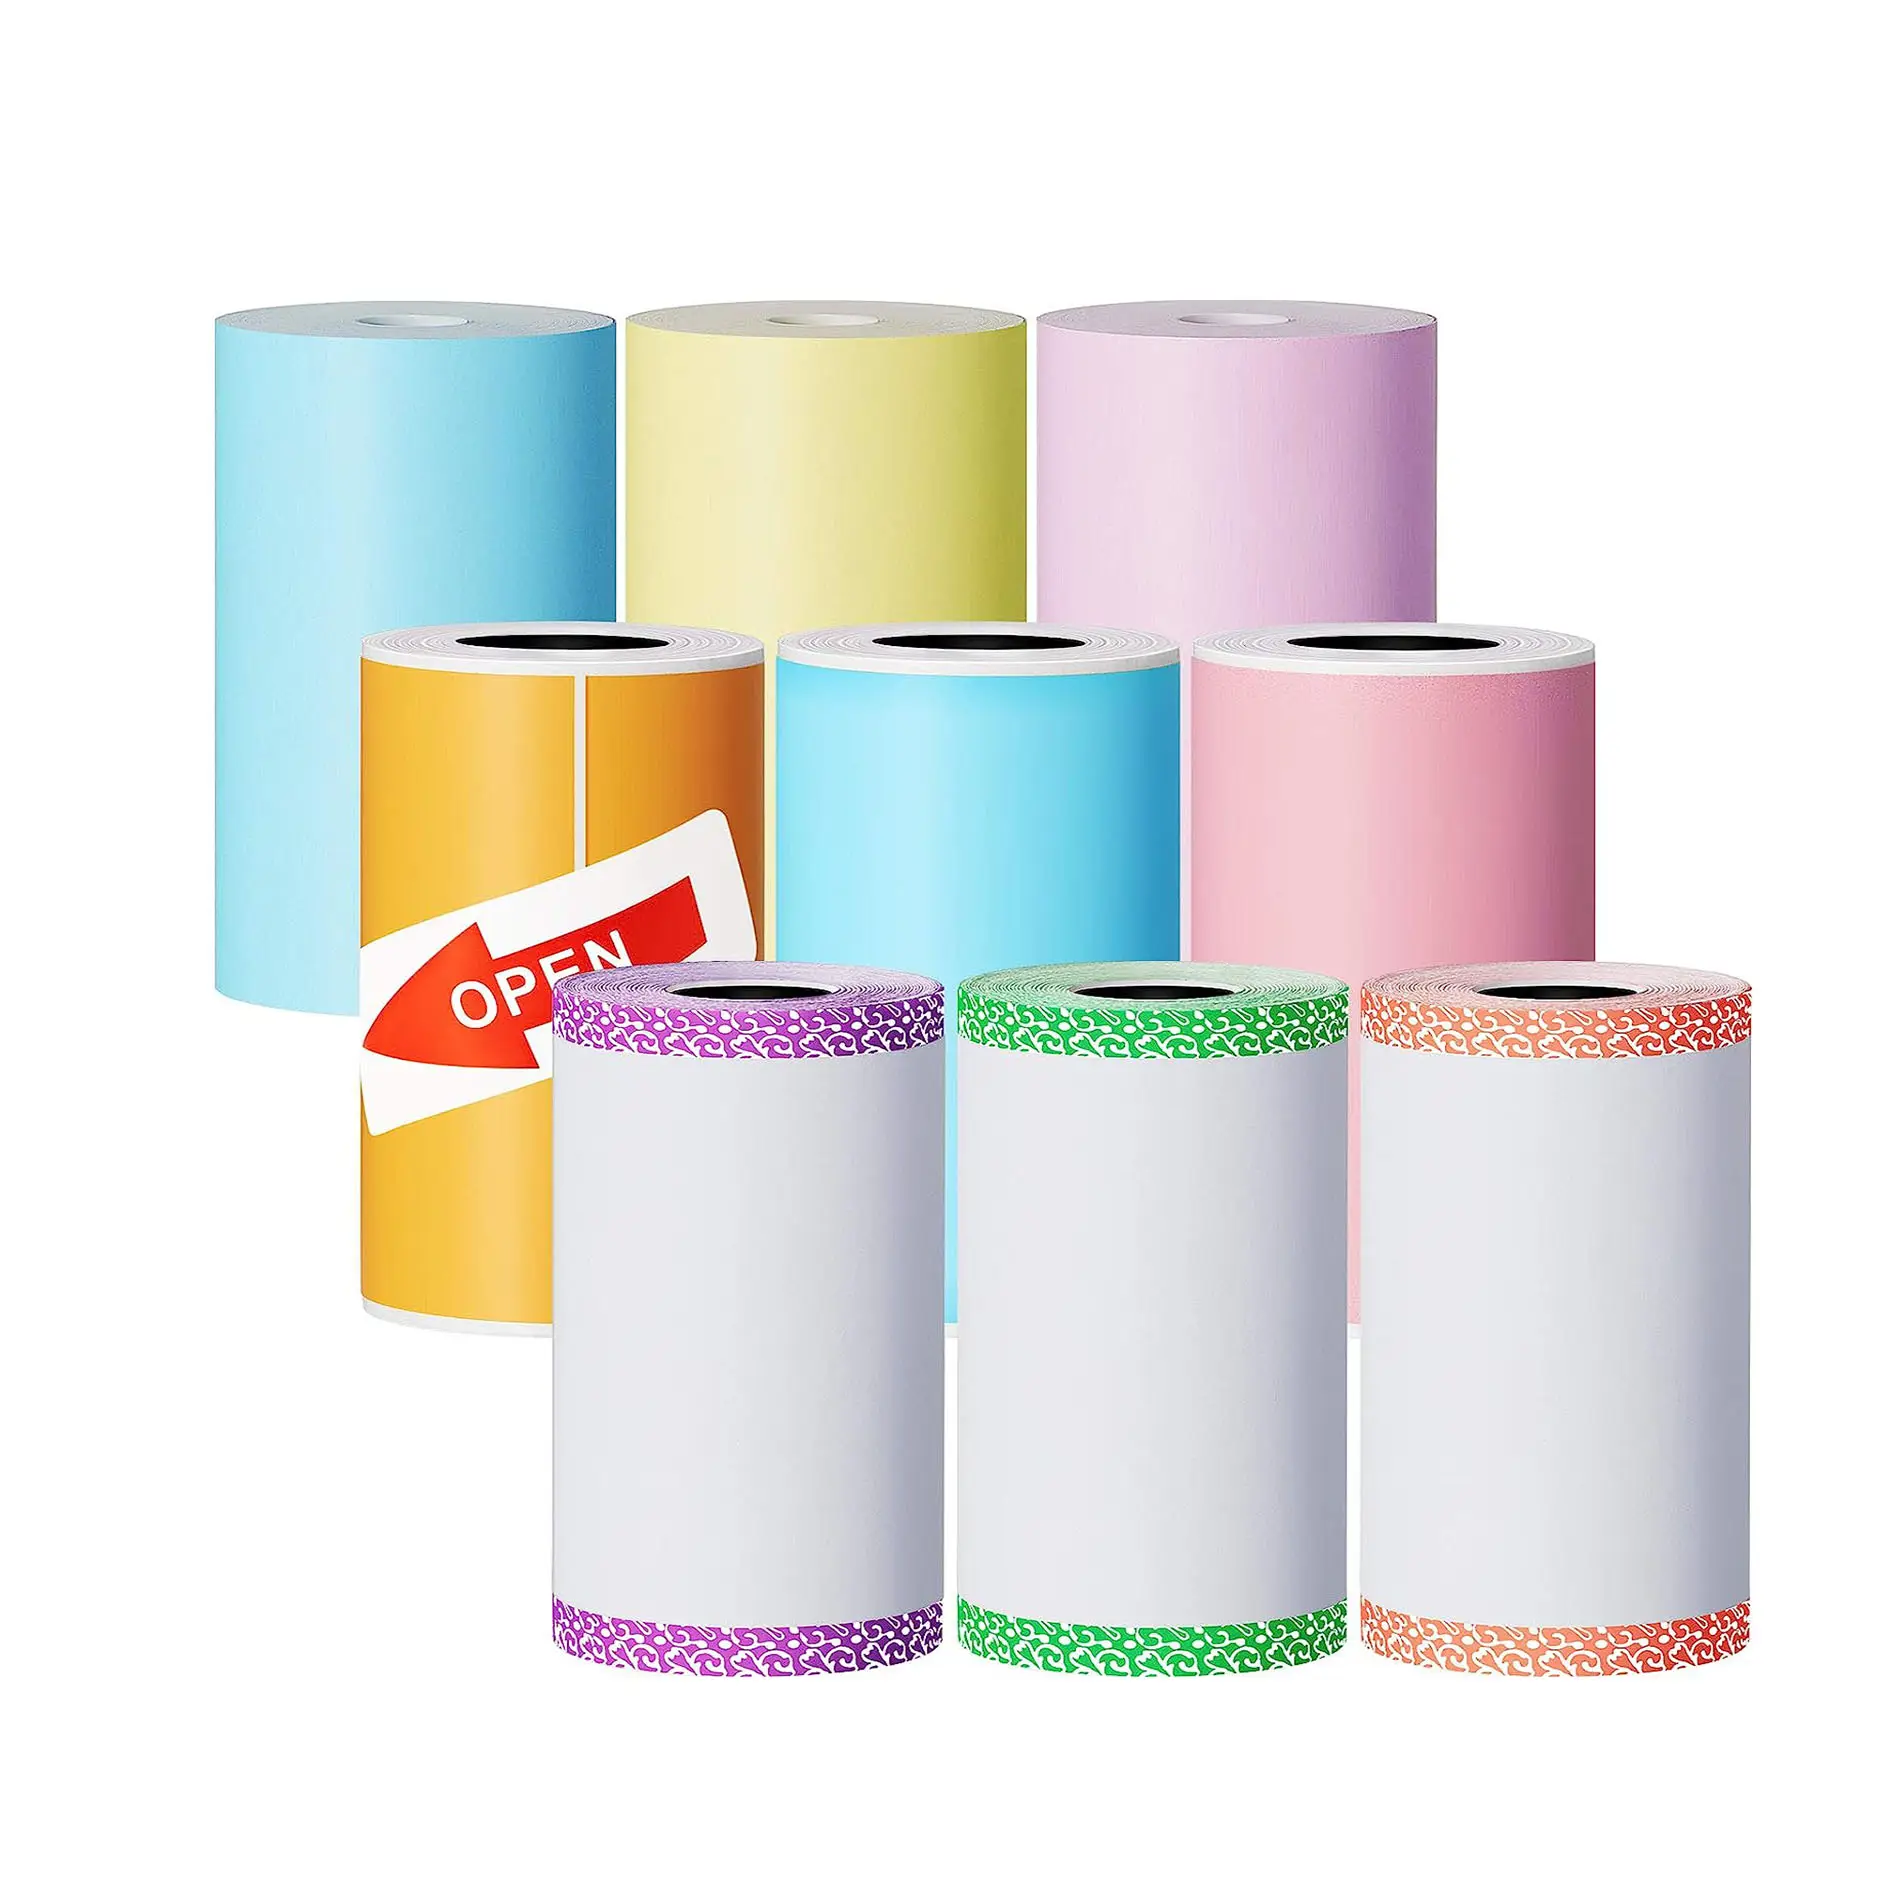 Hot Sales Thermal Printer Paper Colorful Mini Printing Paper Roll and Self-Adhesive Printable Sticker Compatible